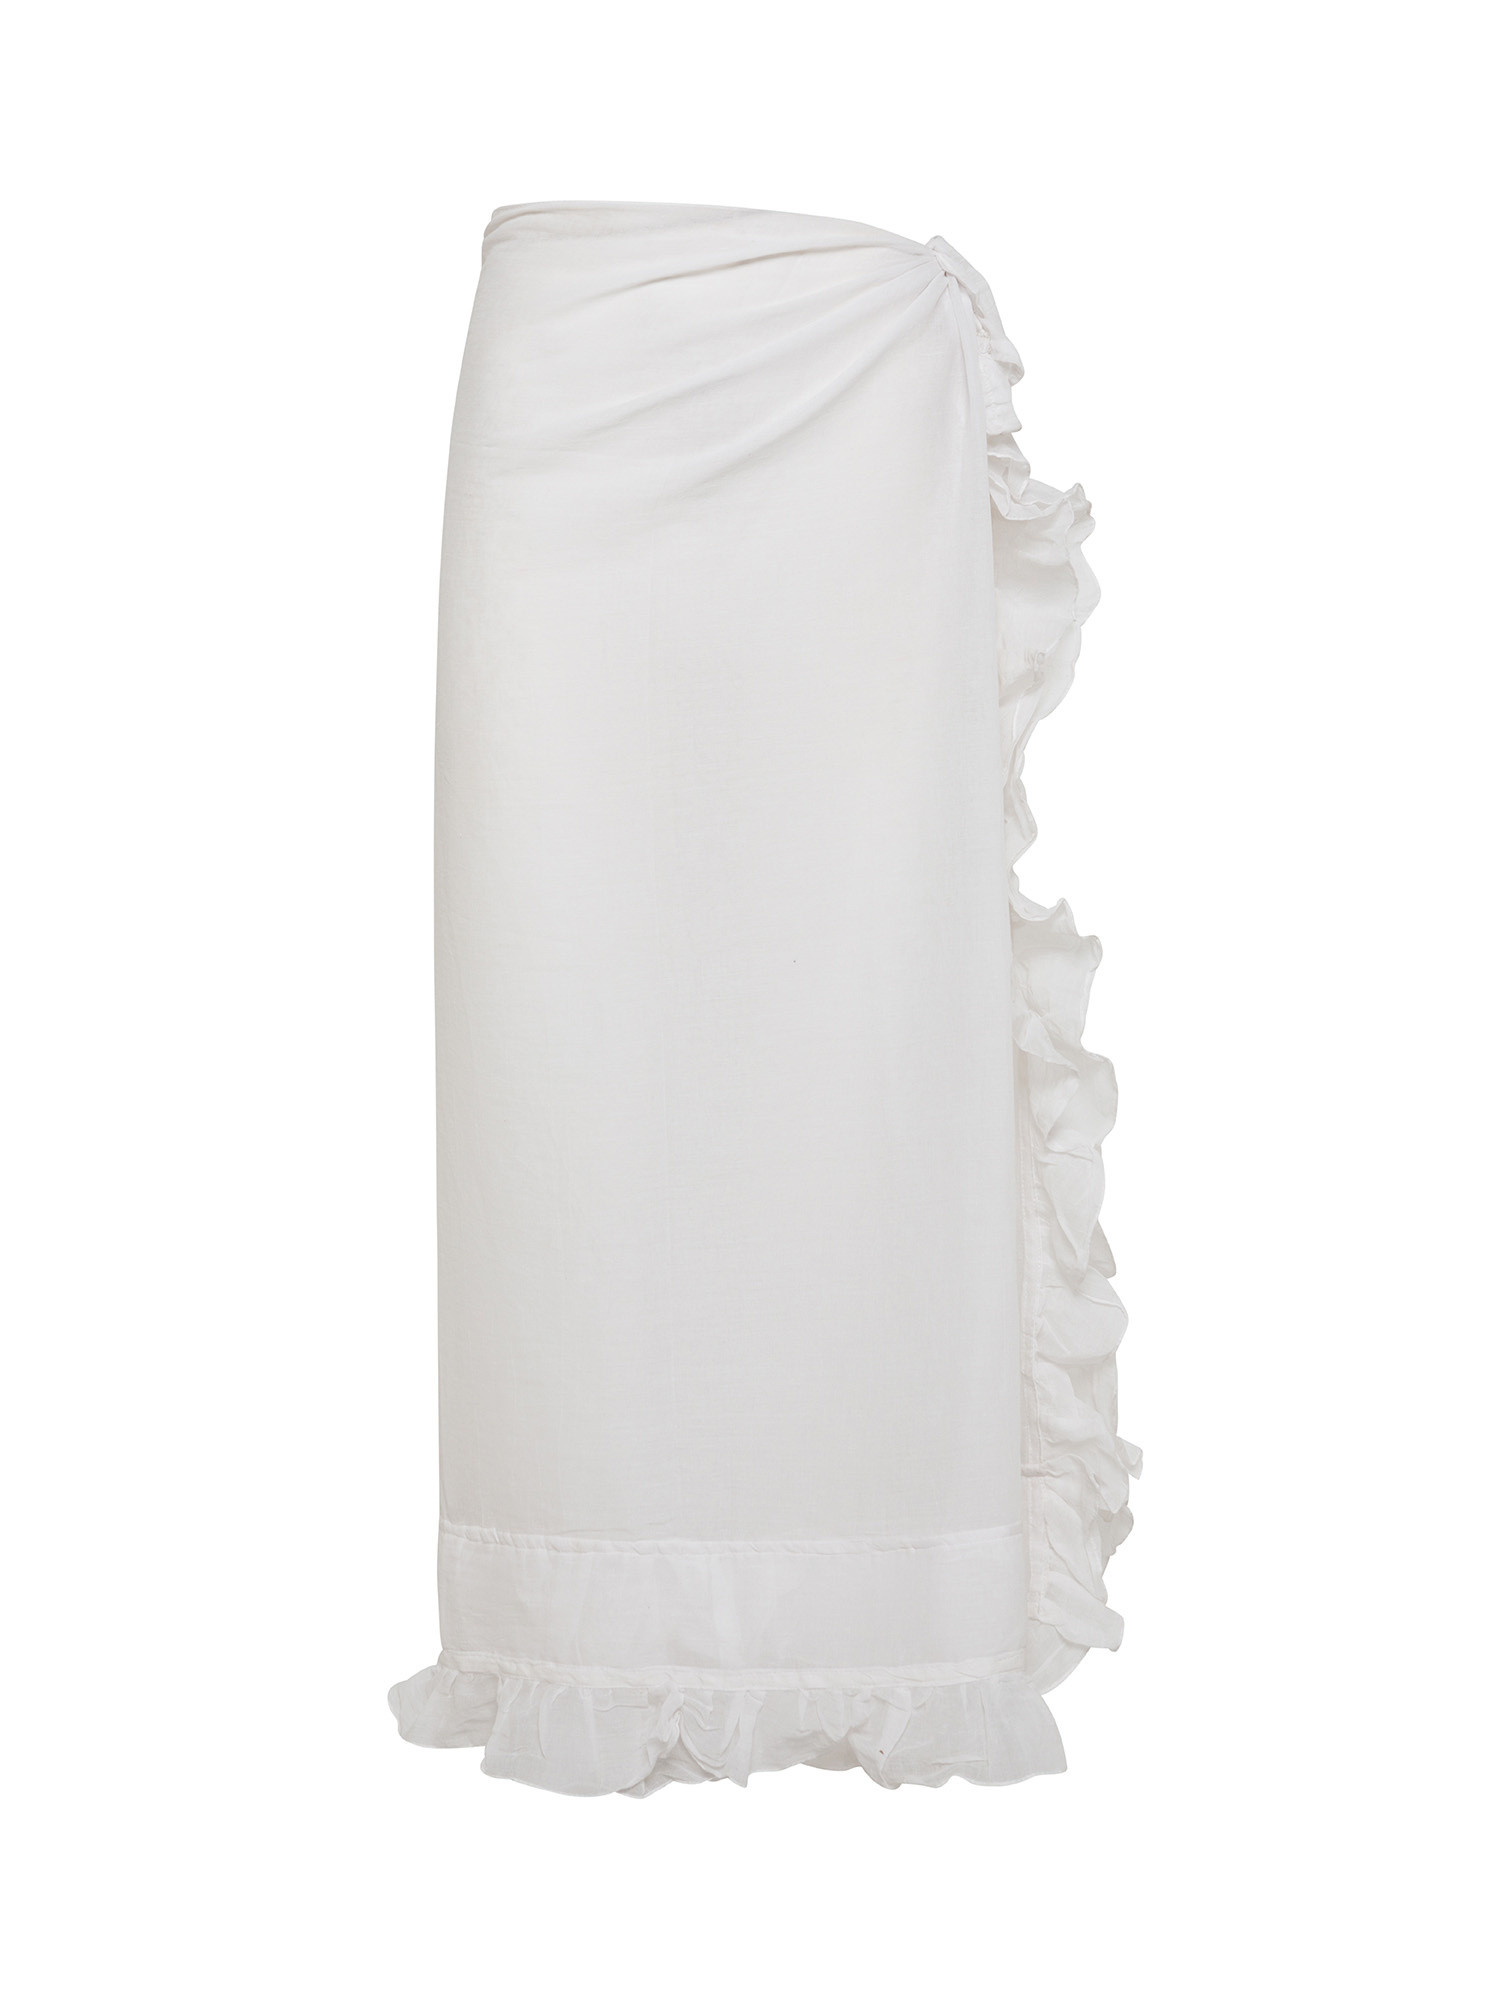 Koan - Sarong in cotton with ruffles, White, large image number 0